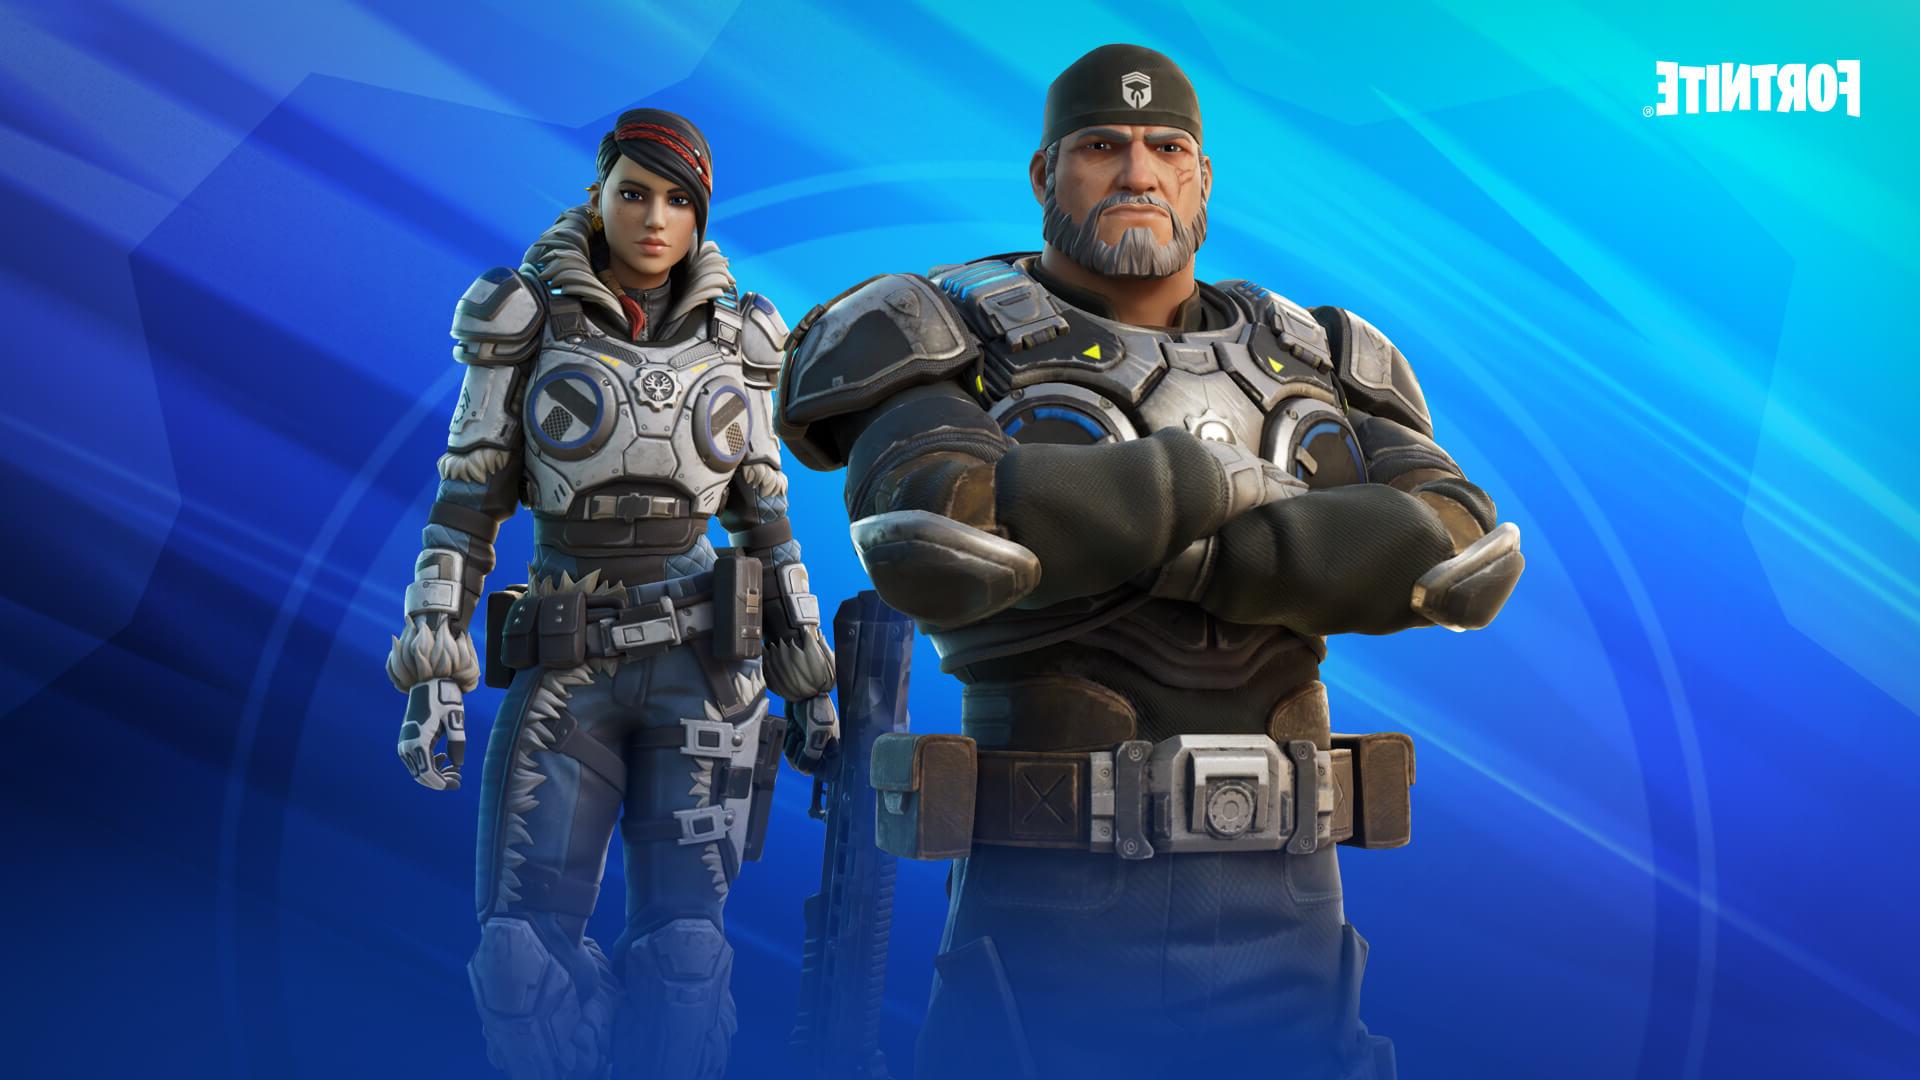 The Game S Marcus Fenix And Kait Diaz Are Available Now In